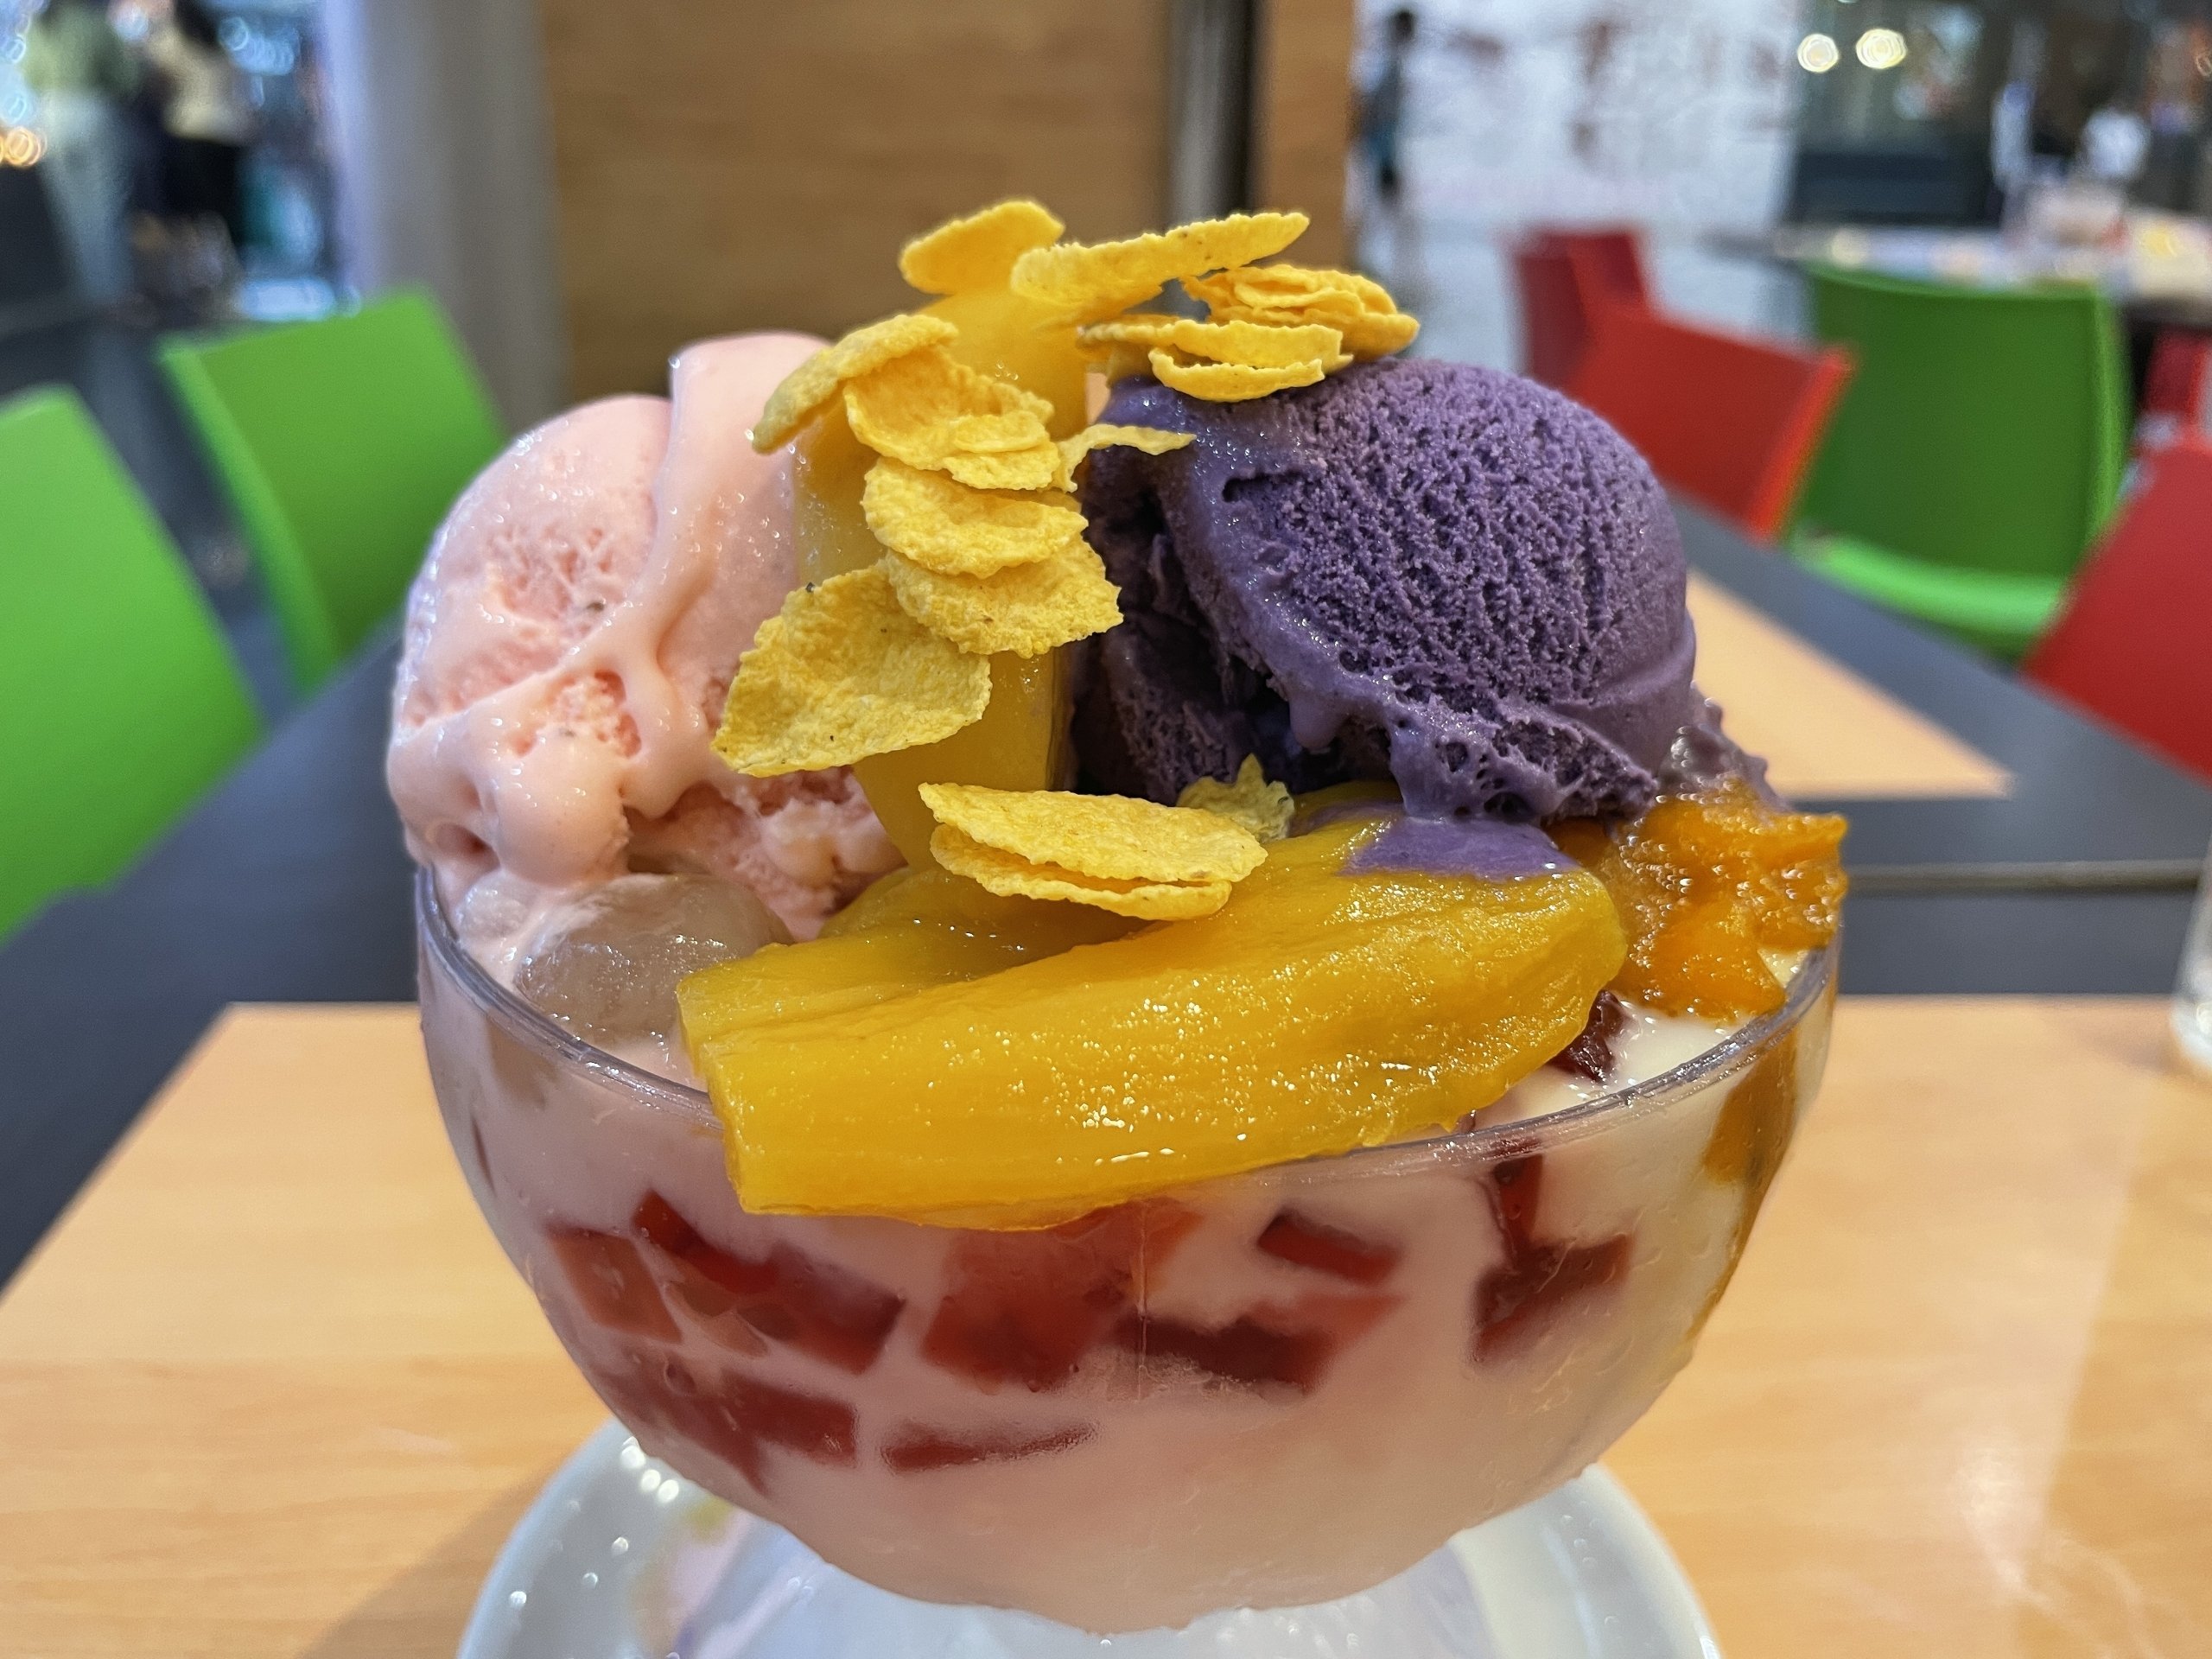 Halo-halo is a popular Filipino dessert and drink at the same time. Sweetened fruits such as bananas or coconut strips, candied mung or kidney beans and red and green jelly pieces are covered with scraped ice, June 14, 2022. (DPA Photo)